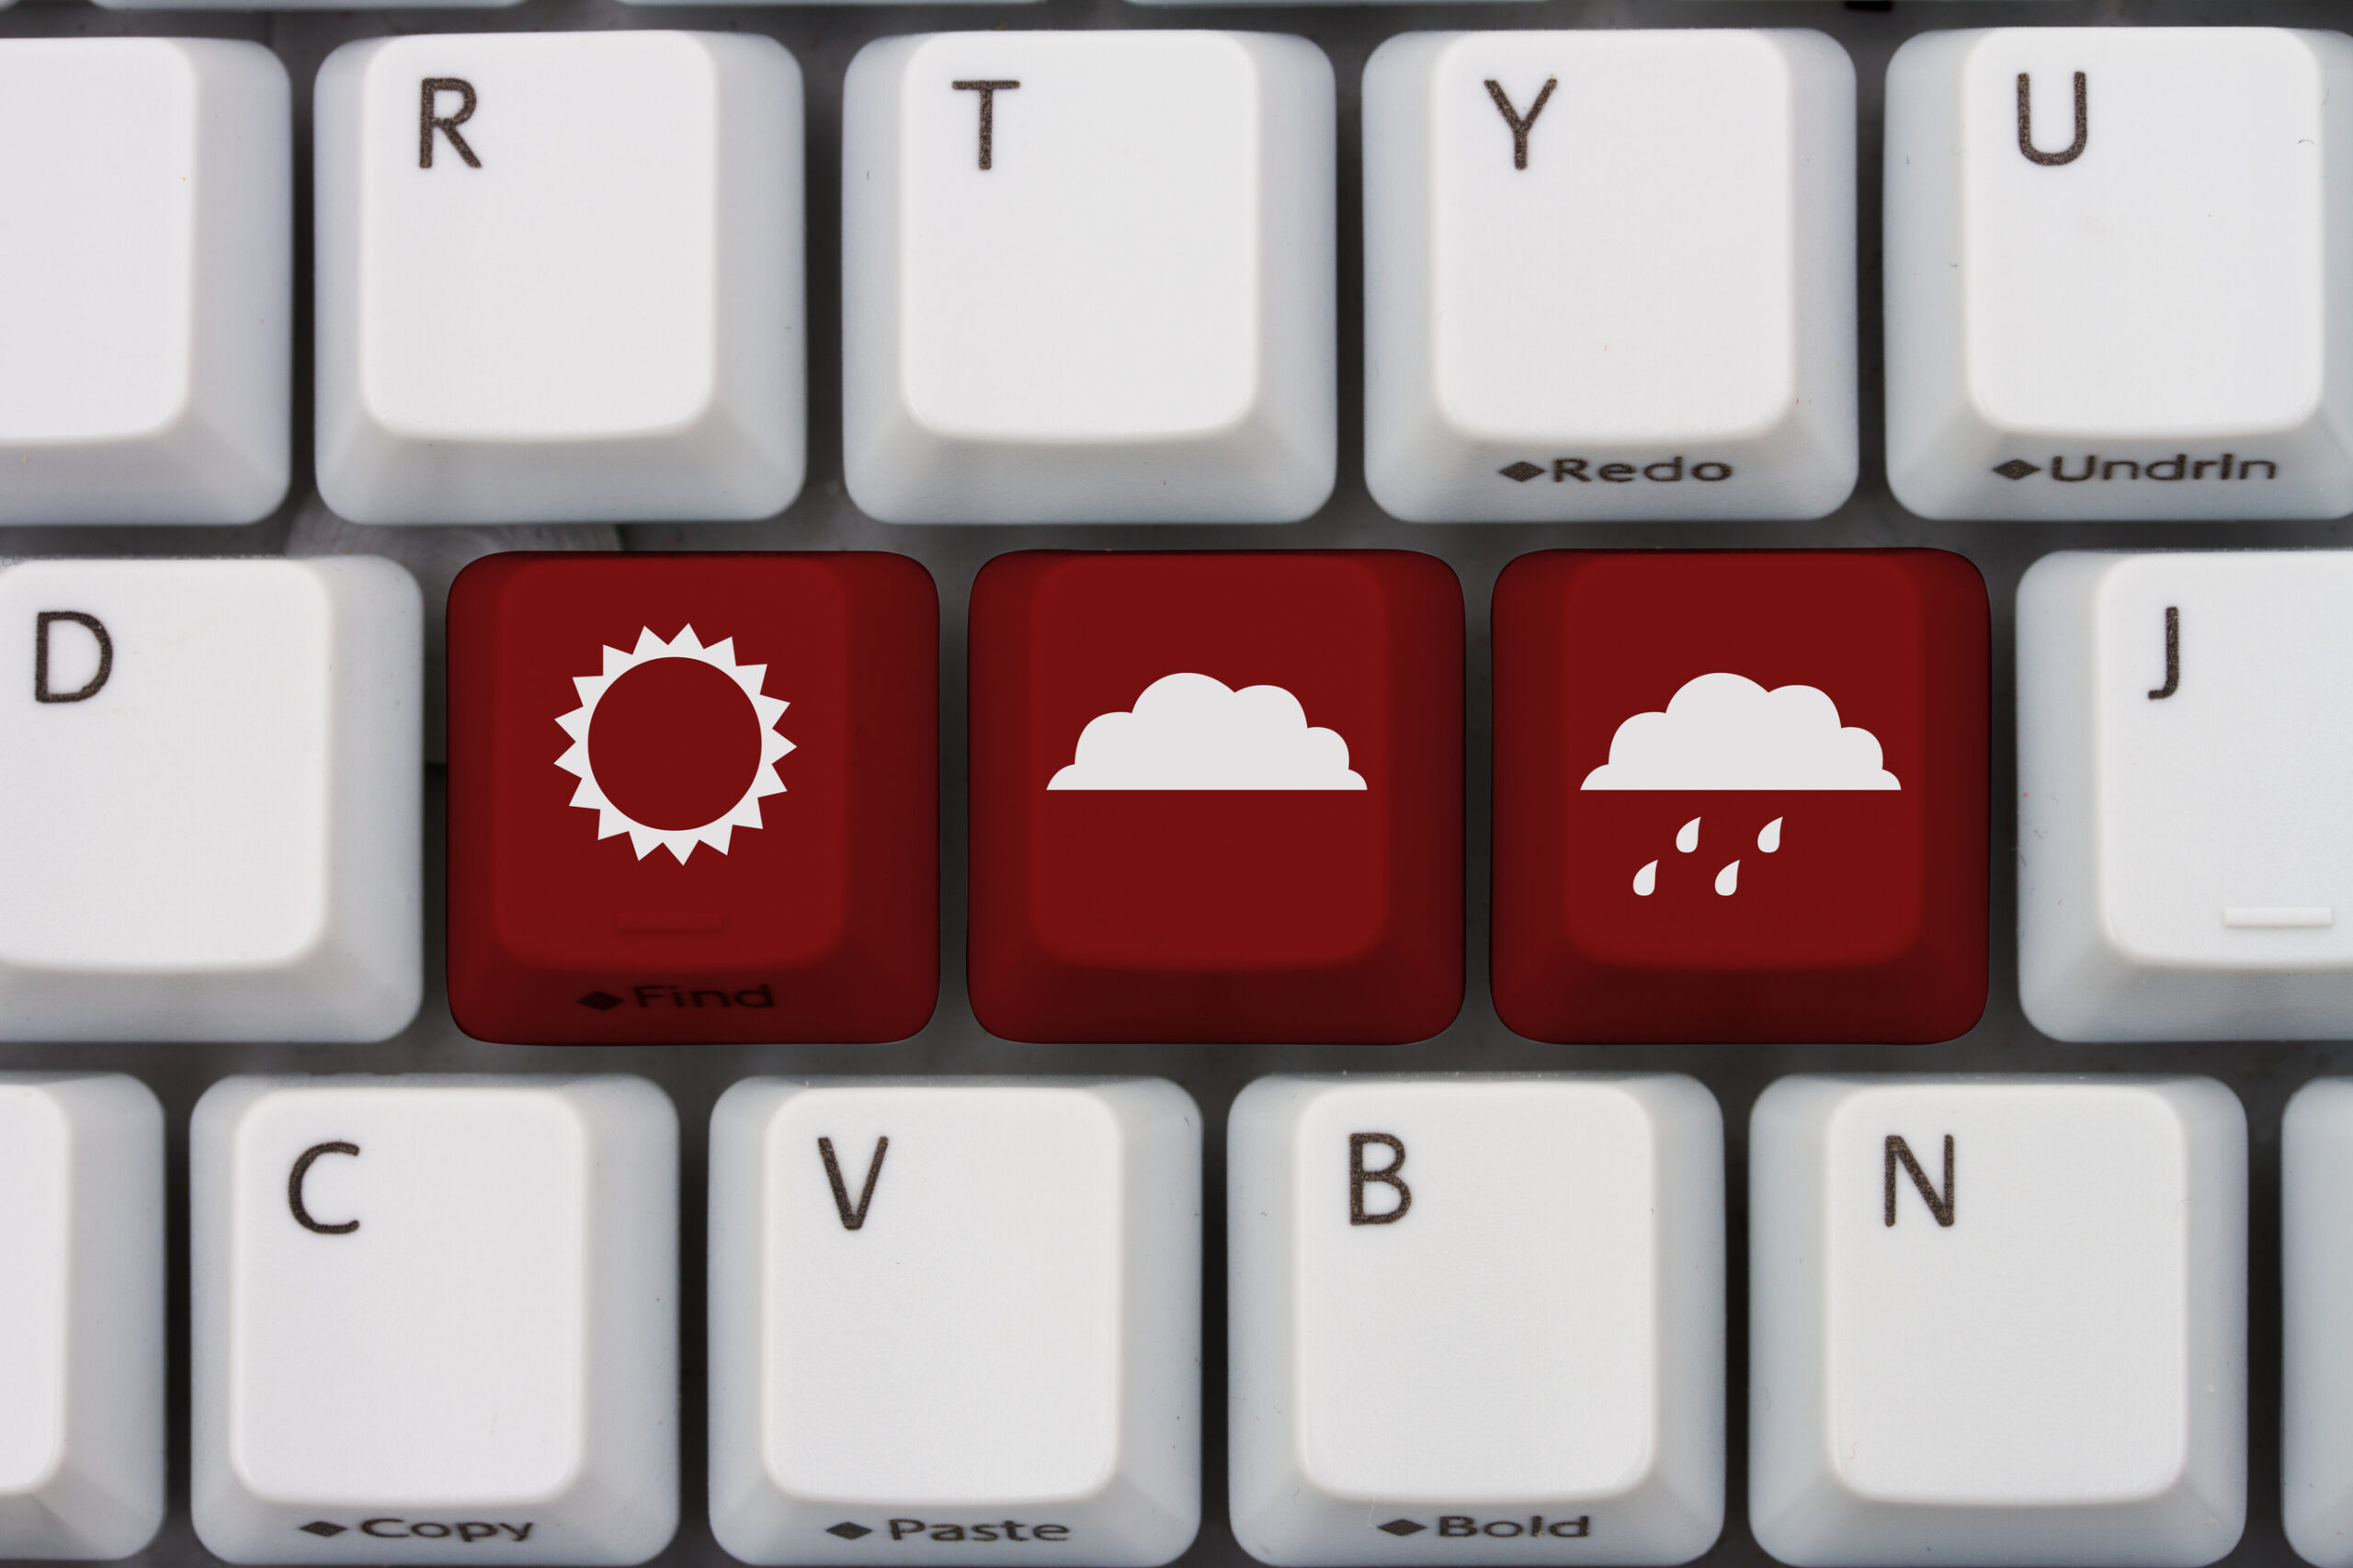 Keyboard with weather icons in red